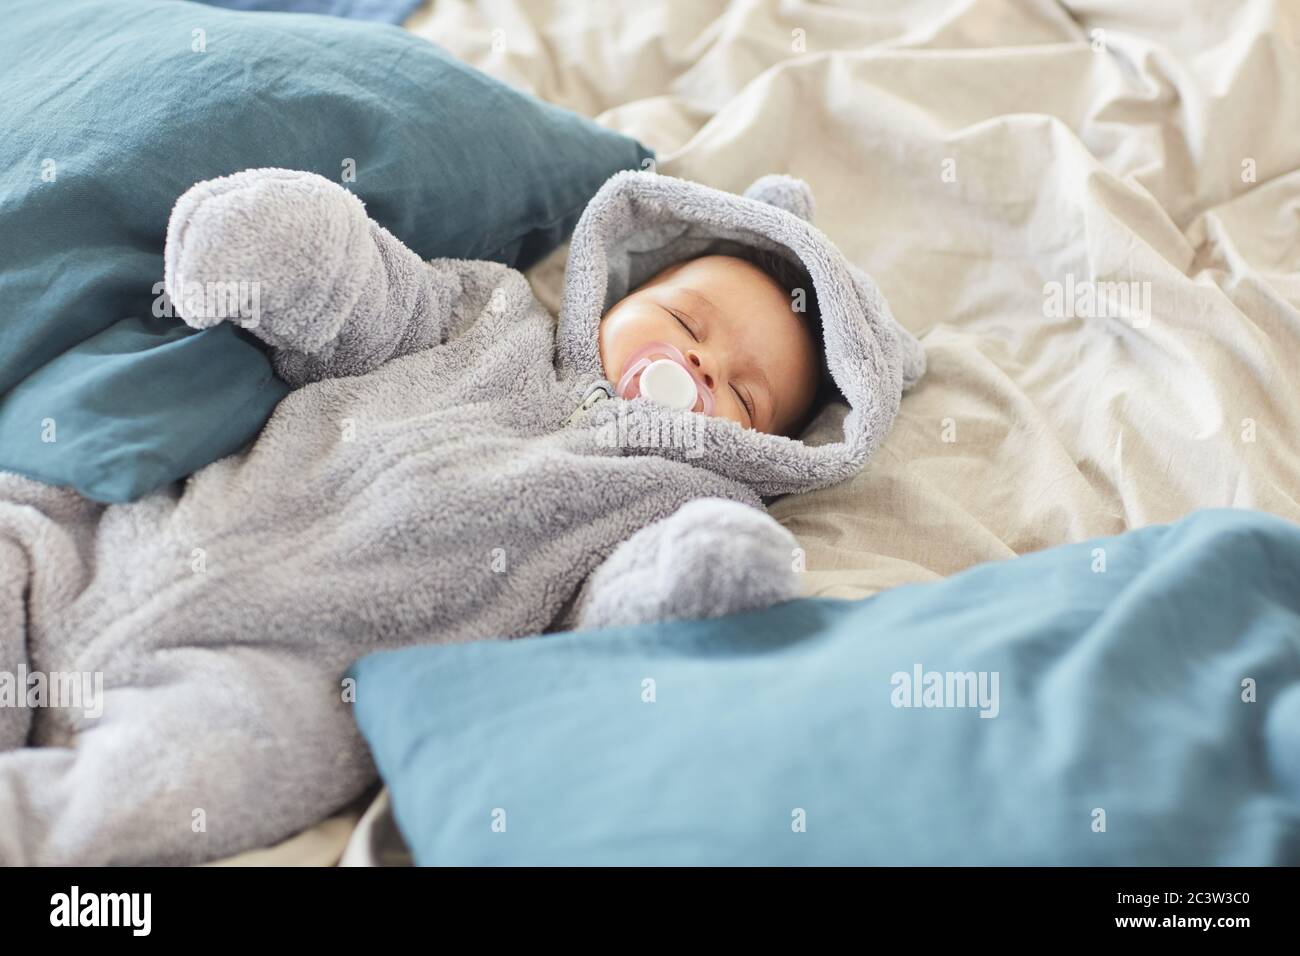 https://c8.alamy.com/comp/2C3W3C0/high-angle-portrait-of-cute-mixed-race-baby-wearing-fluffy-onesie-sucking-on-pacifier-while-sleeping-lying-on-bed-blankets-copy-space-2C3W3C0.jpg